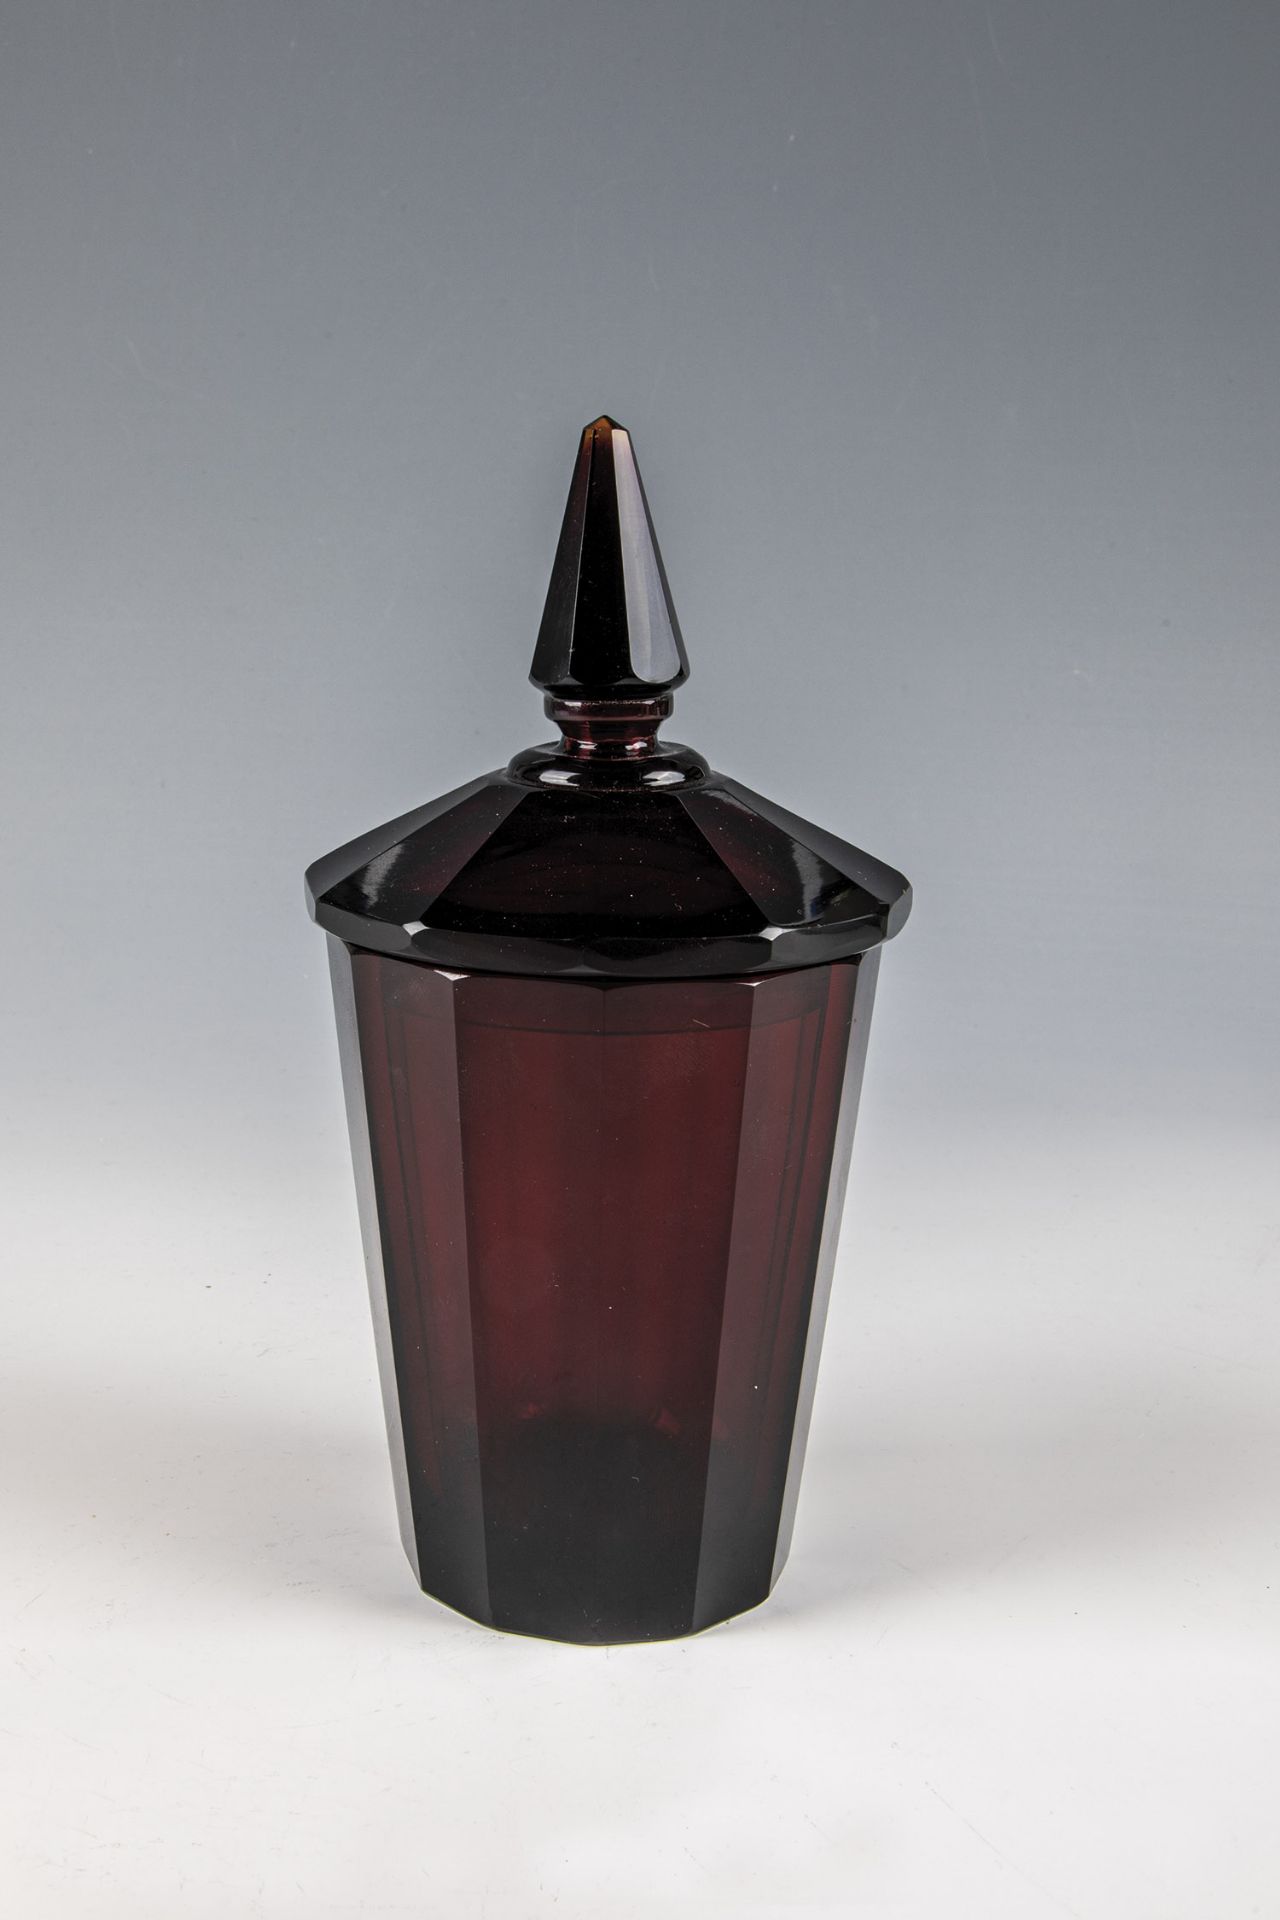 Lidded cup North Bohemia, m. 19th century Copper ruby glass dyed in the mass. The conically